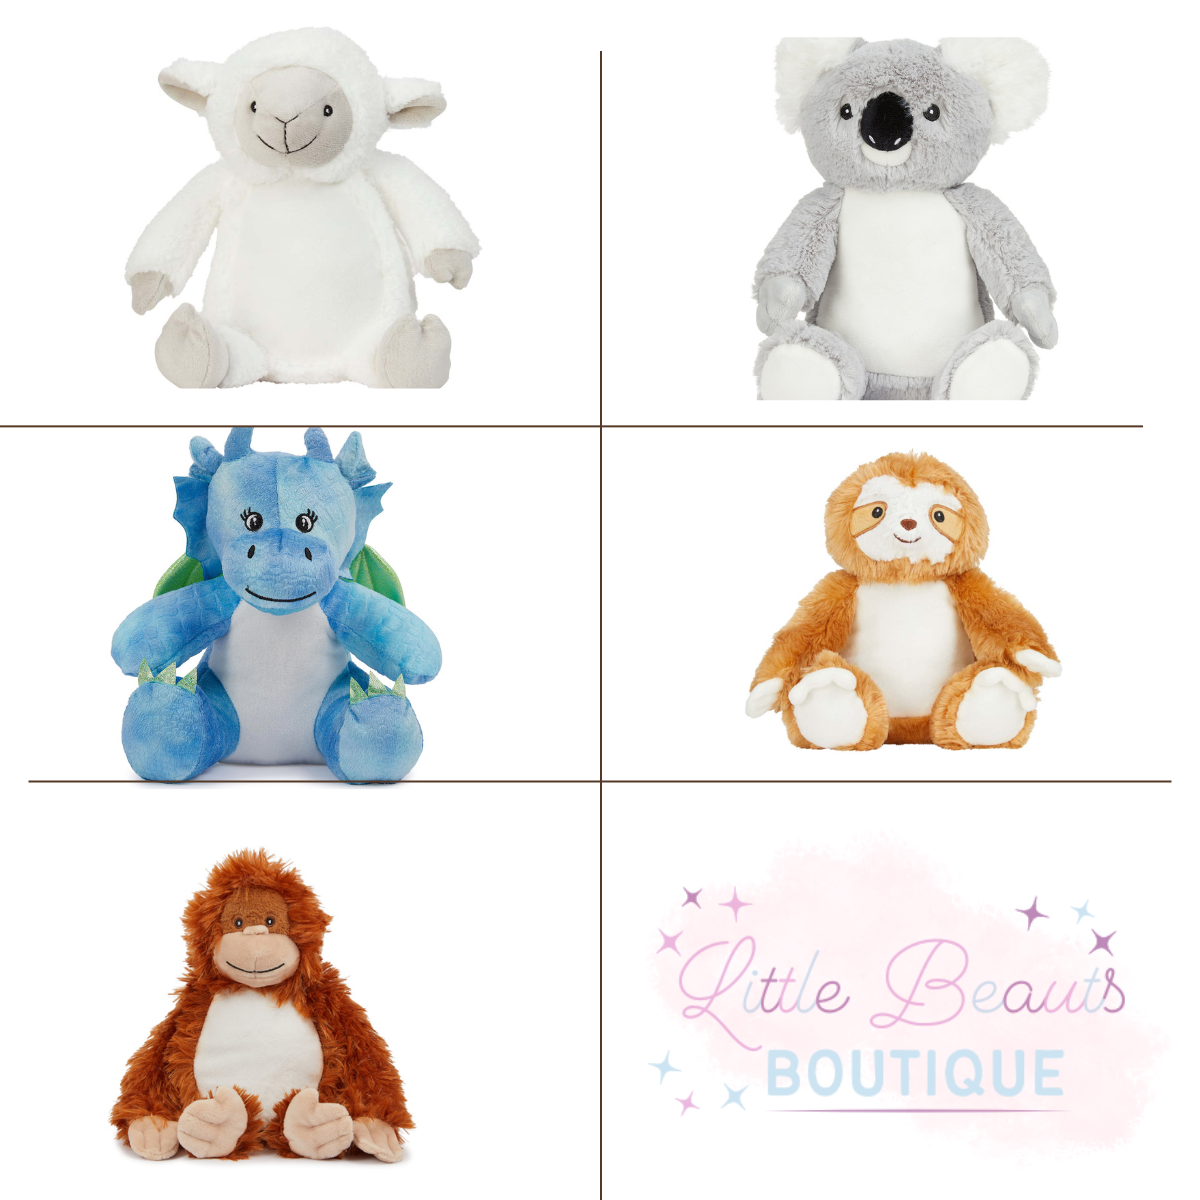 Personalised Baby Birth / Name Soft Plush Soft Animal Teddy - 24 choices!